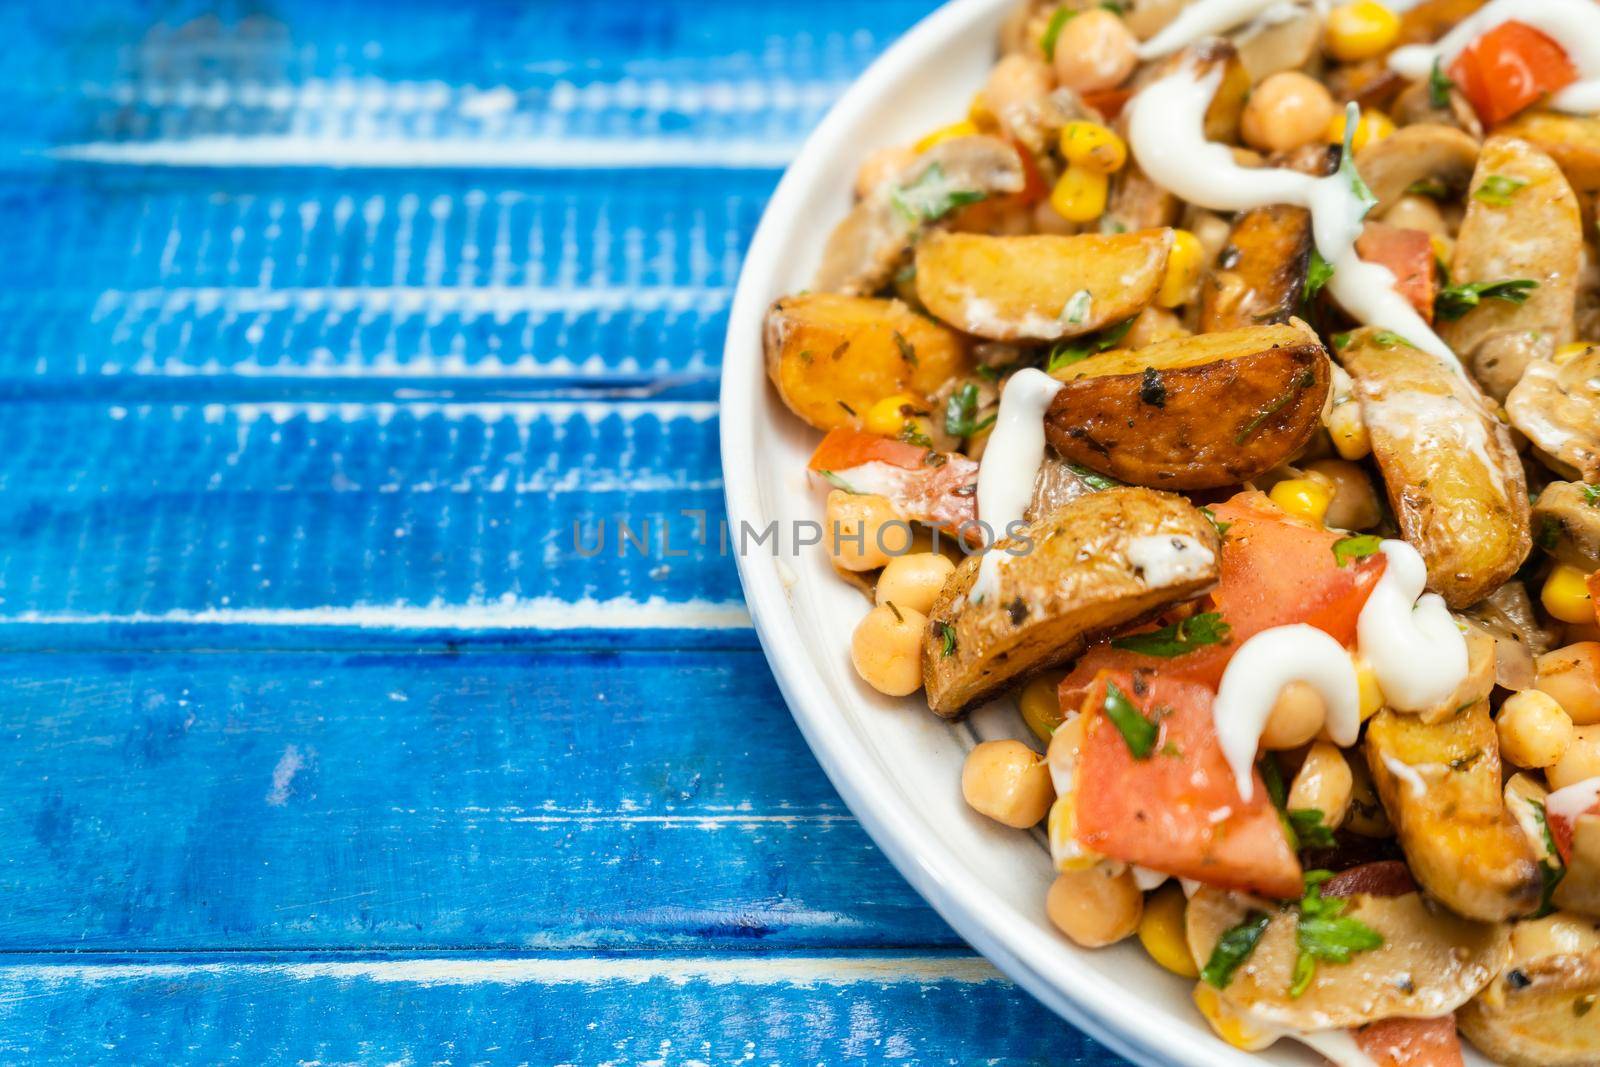 A delicious potato, chickpea, tomato and mushroom salad with parsley and aioli in an isolated plate on a blue rustic table. Healthy, homemade, vegan food. Partial view, copy space